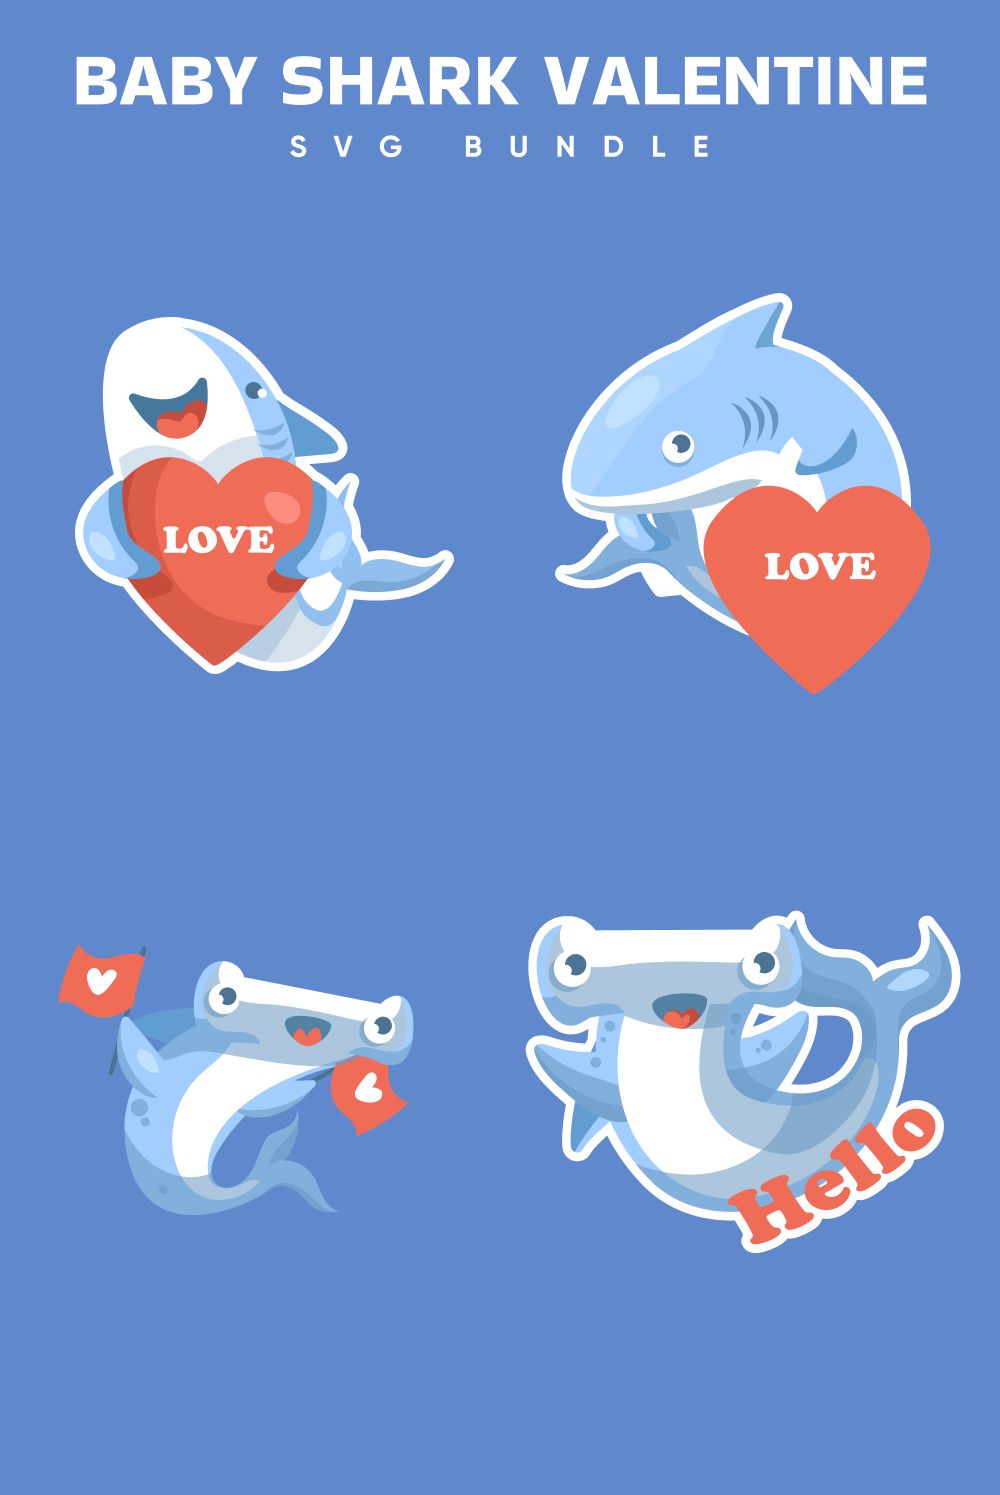 Cute white and hammerhead sharks with big red hearts in their fins.